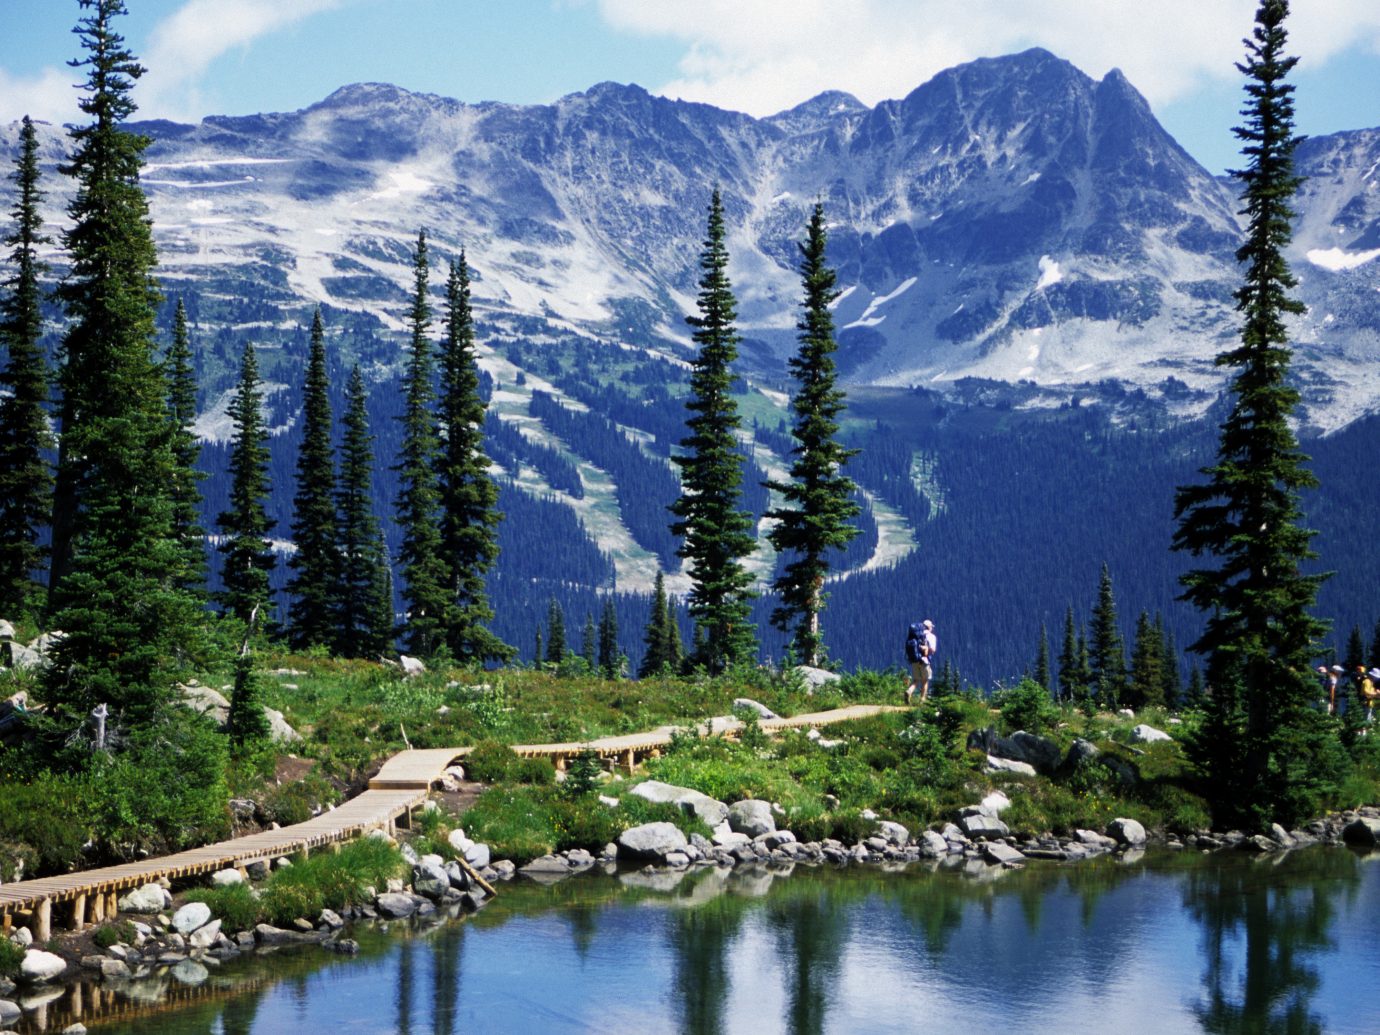 Beauty Trip Ideas tree outdoor sky mountain mountainous landforms wilderness Lake reflection mountain range Nature conifer ecosystem woody plant Forest pond landscape alps ridge larch temperate coniferous forest meadow biome surrounded plant wooded hillside